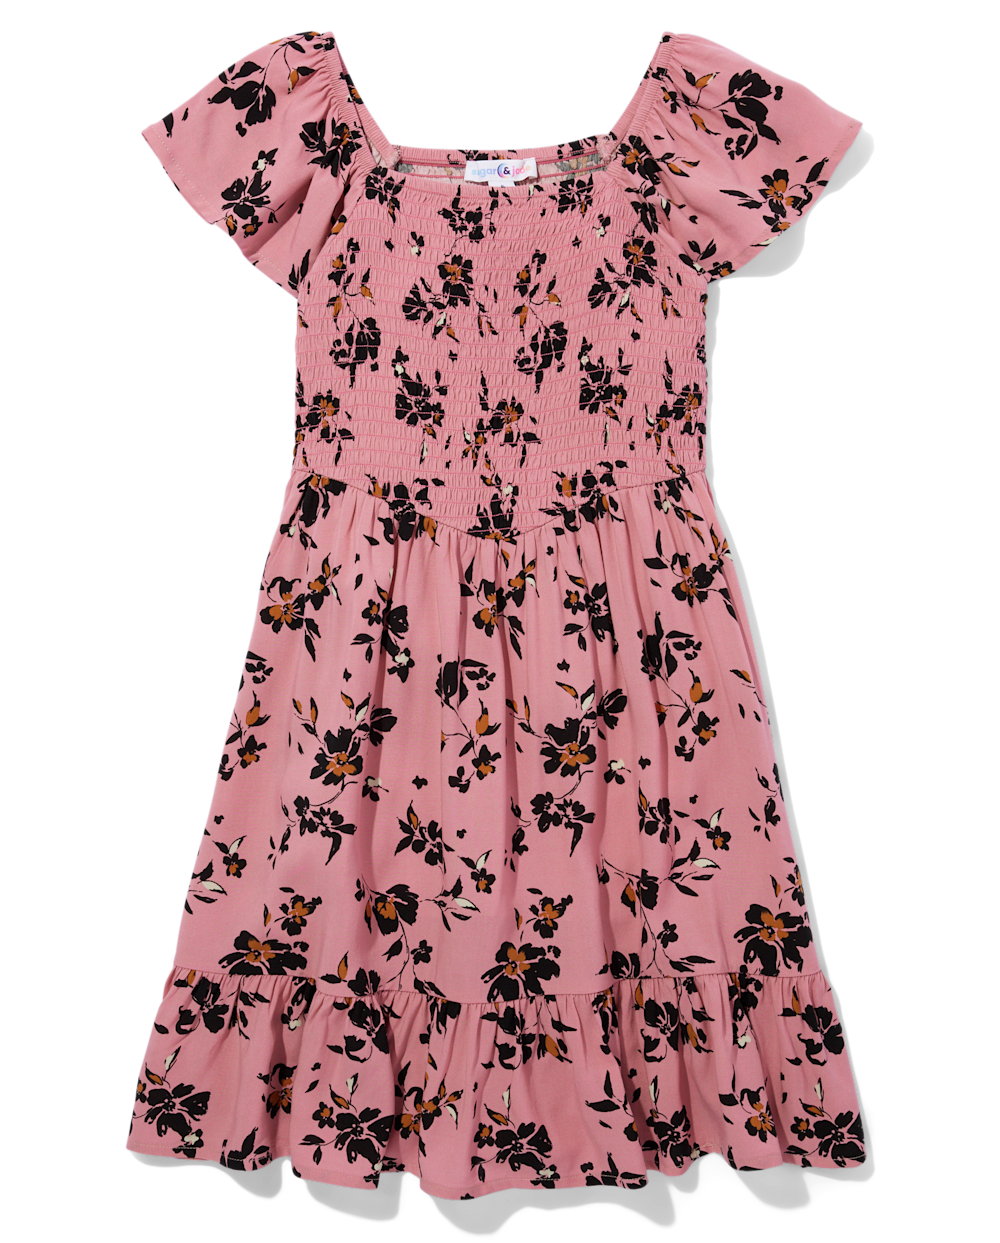 Girls Floral Print Rayon Flutter Short Sleeves Sleeves Smocked Square Neck Above the Knee Dress With Ruffles